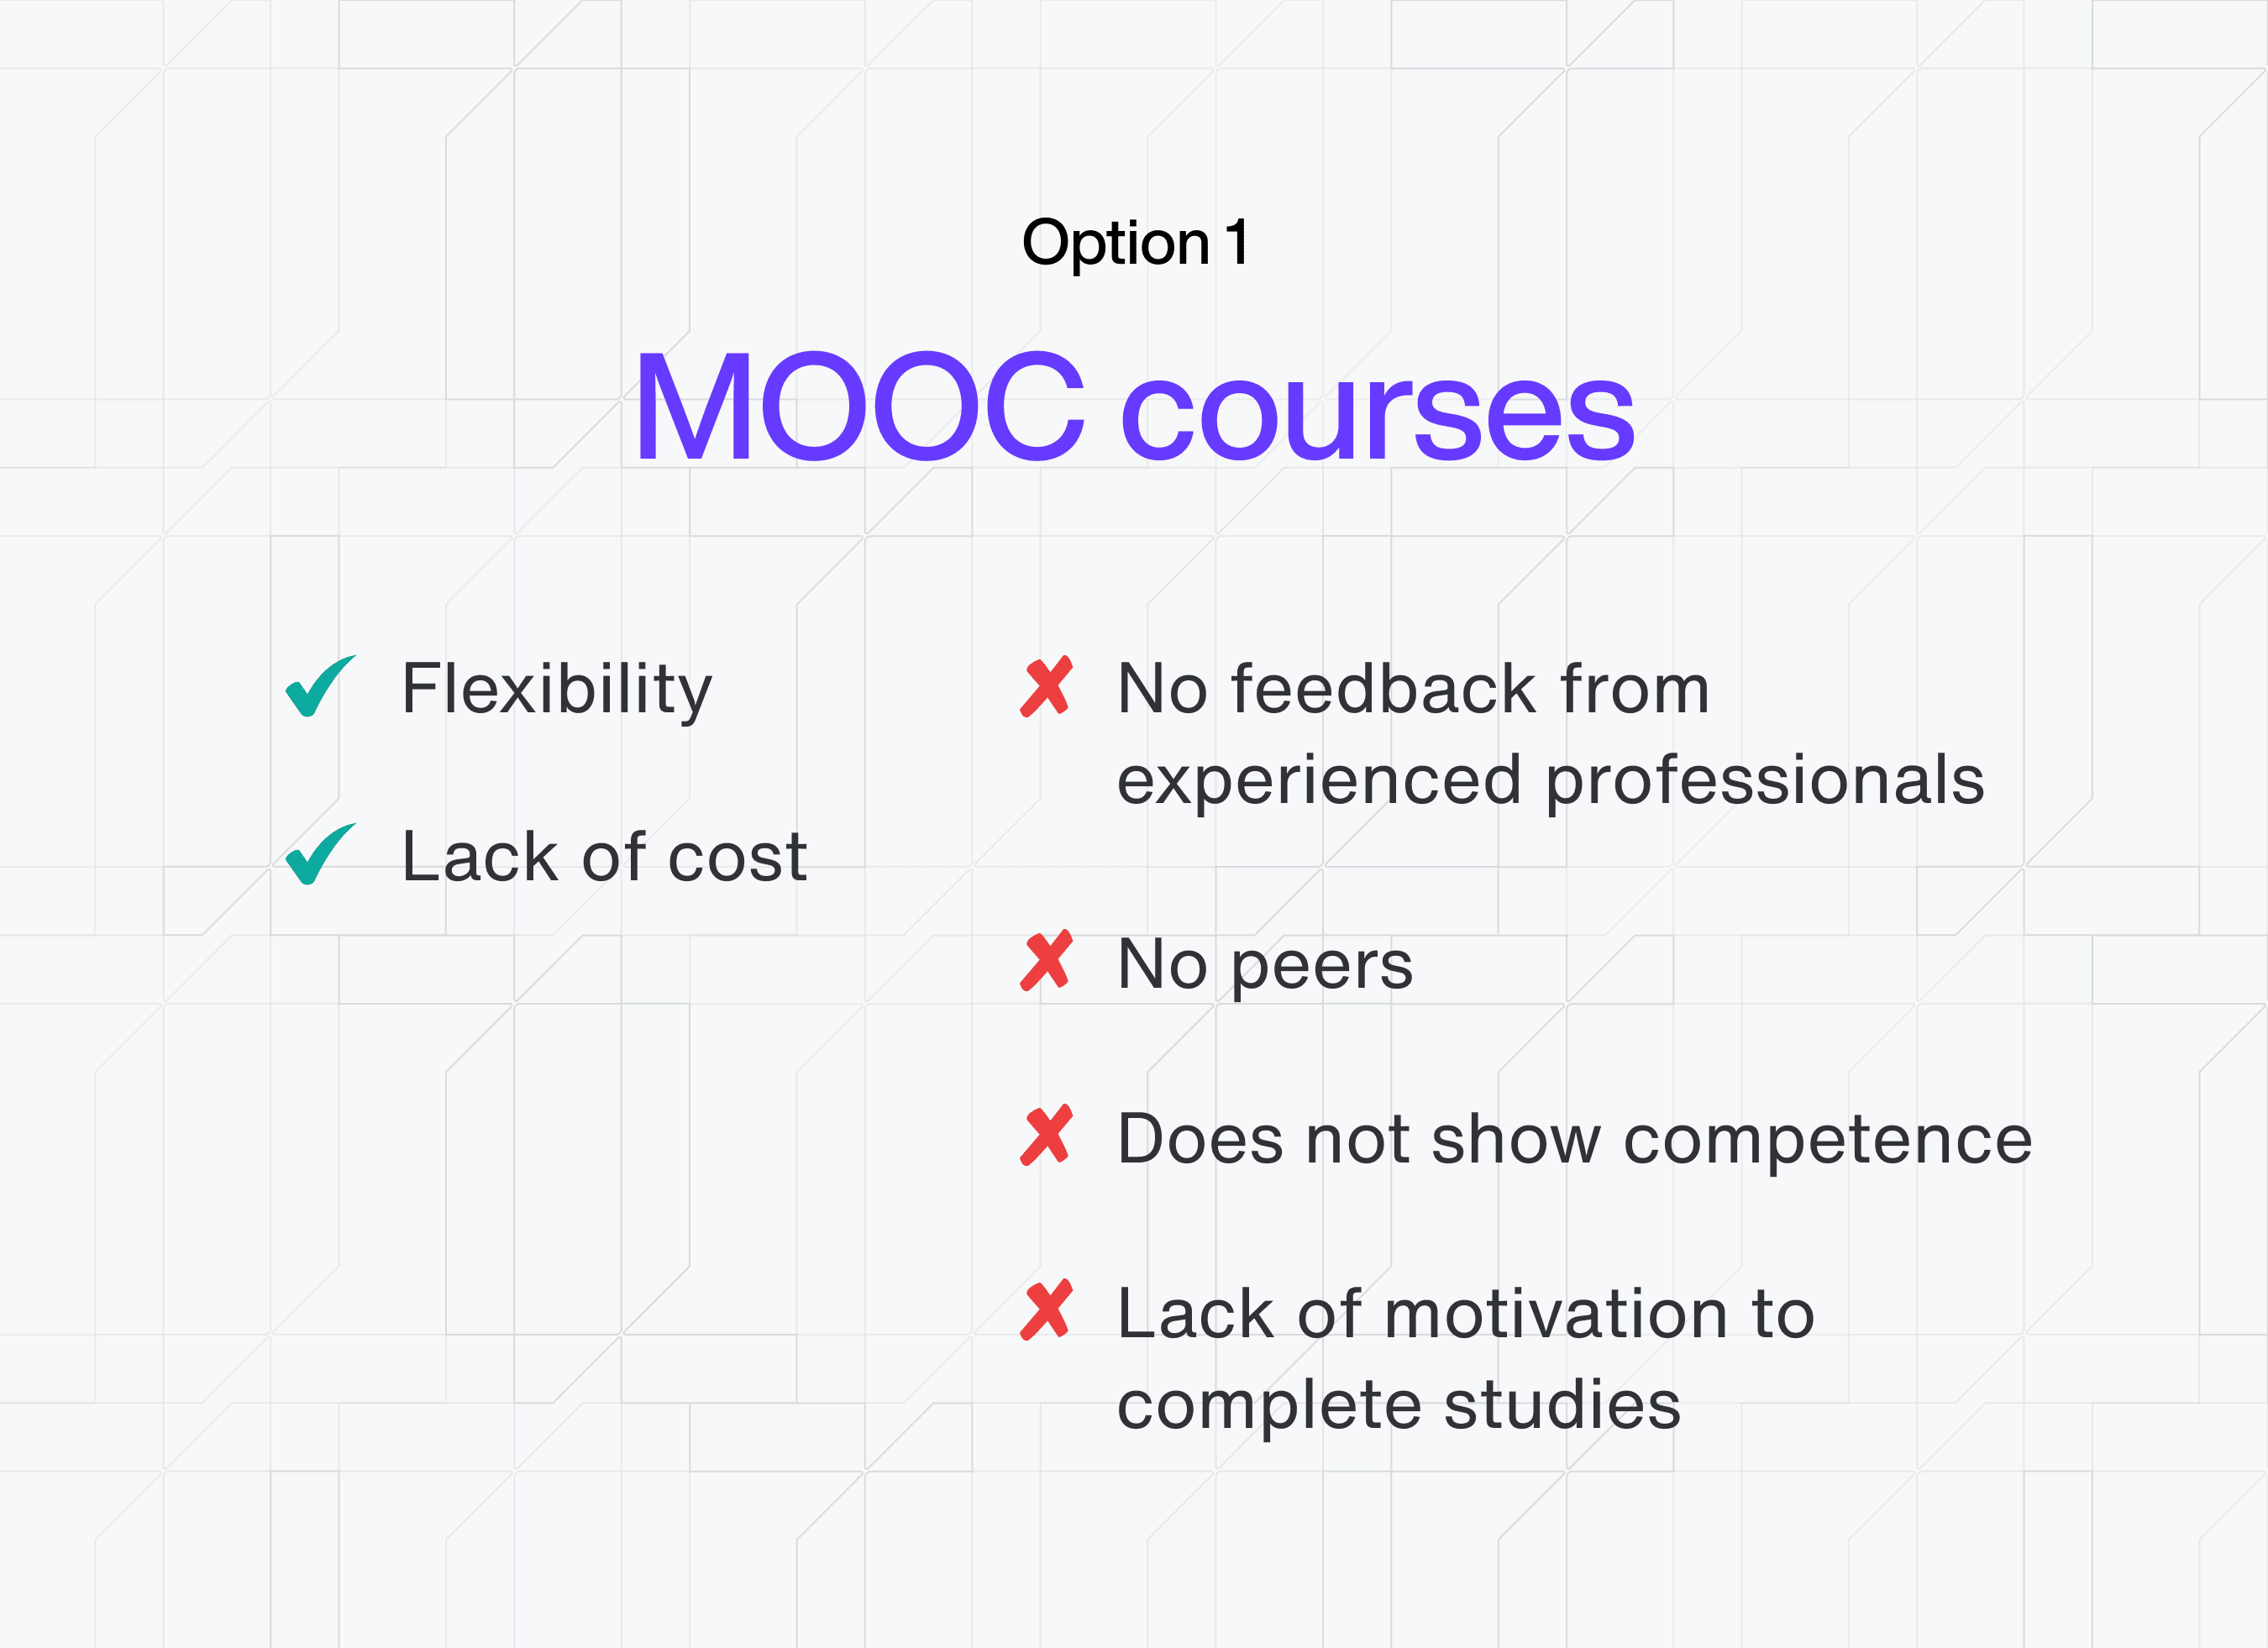 MOOC course pros and cons